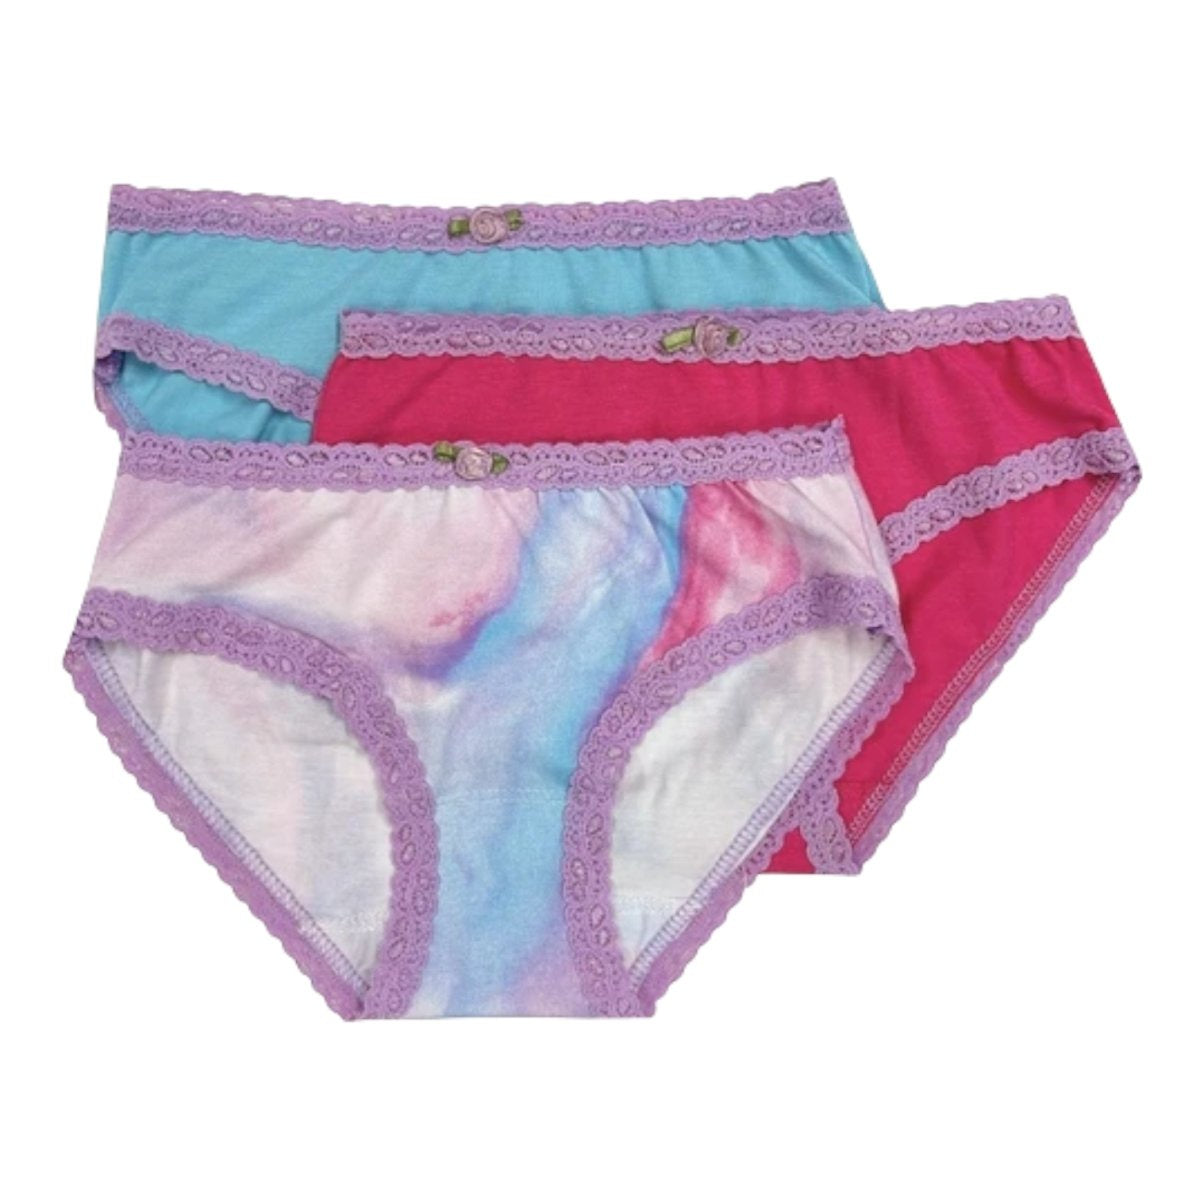 https://jackandemmy.com/cdn/shop/products/marble-panties-esme-831477_2000x_b6de64b7-b5cc-49b9-a0f3-56169669bdf5_1200x.jpg?v=1632865772